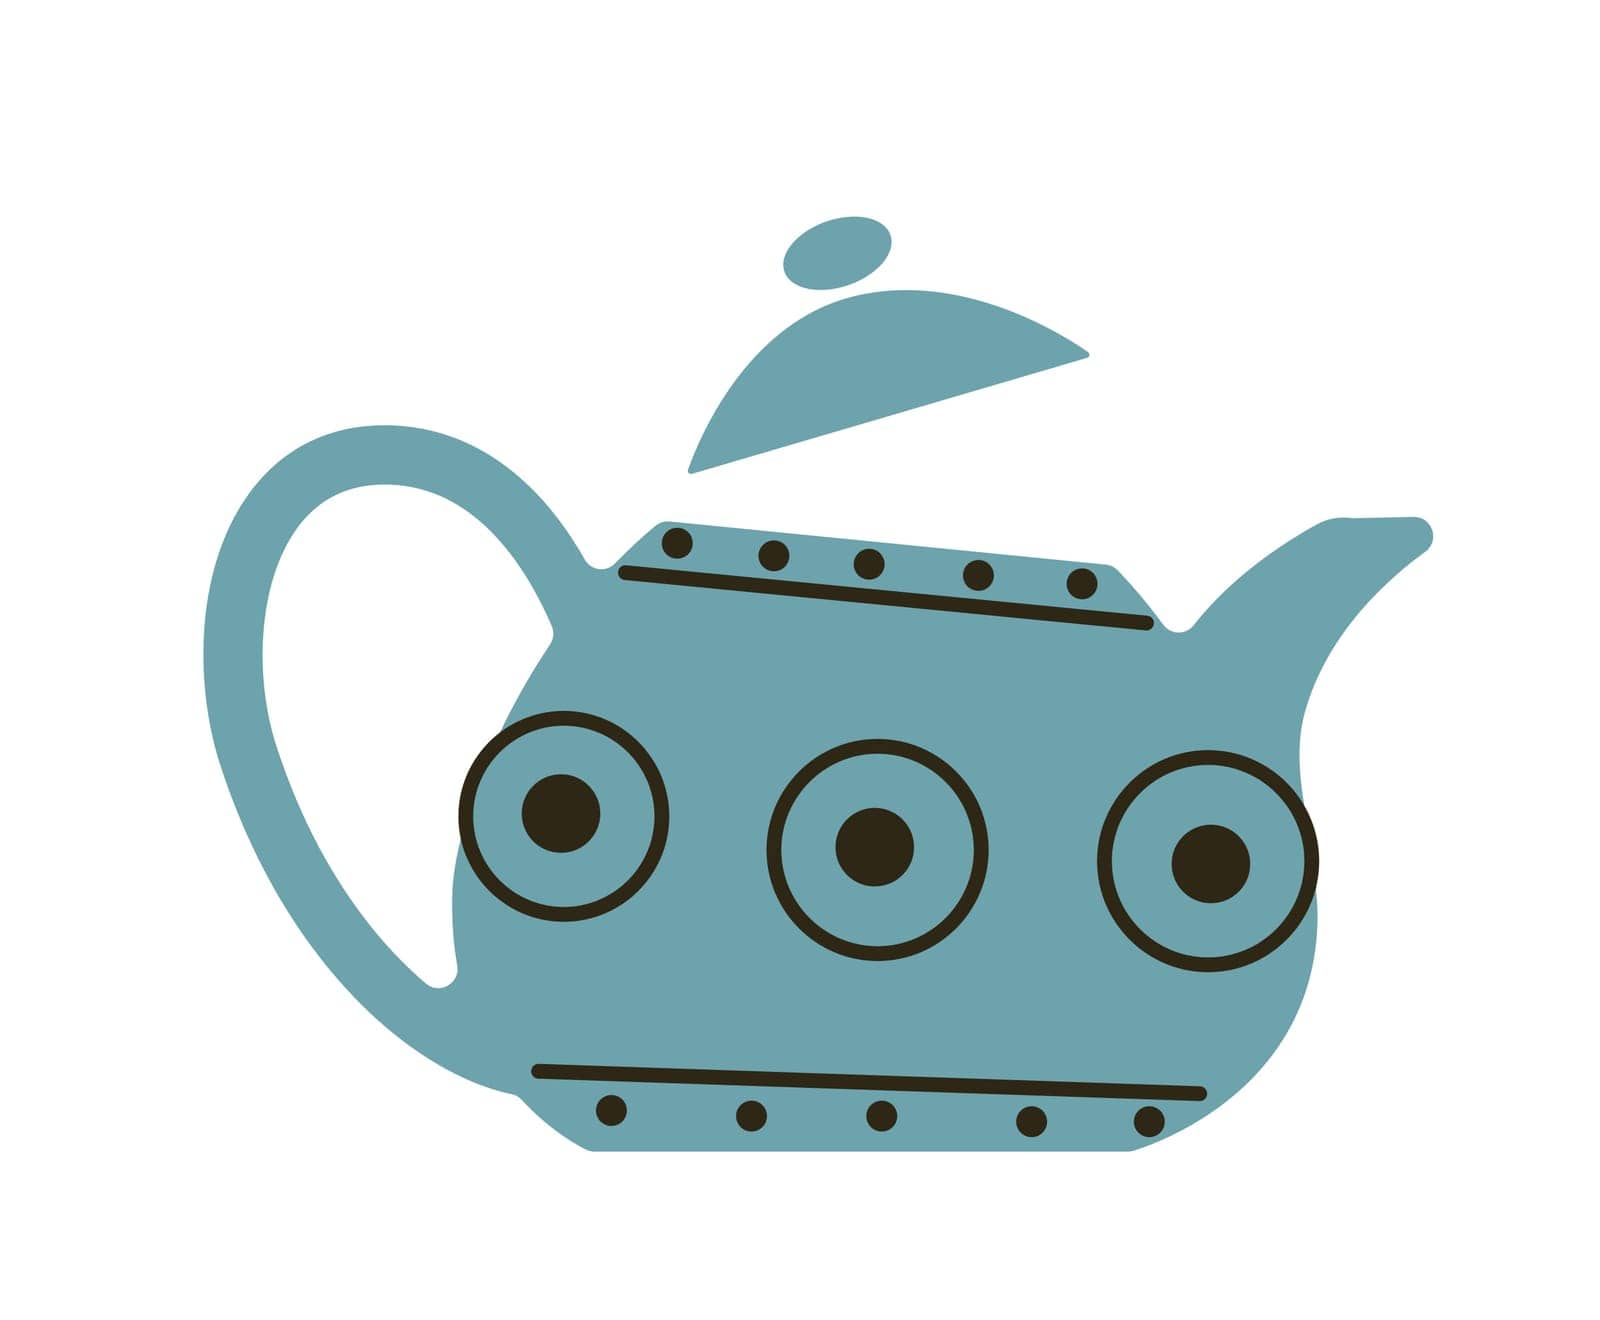 Kitchenware for brewing and making delicious aromatic tea. Isolated ceramic teapot with lid and handle, ornamental design and geometric adornment, and drawing on a dish. Vector in flat style